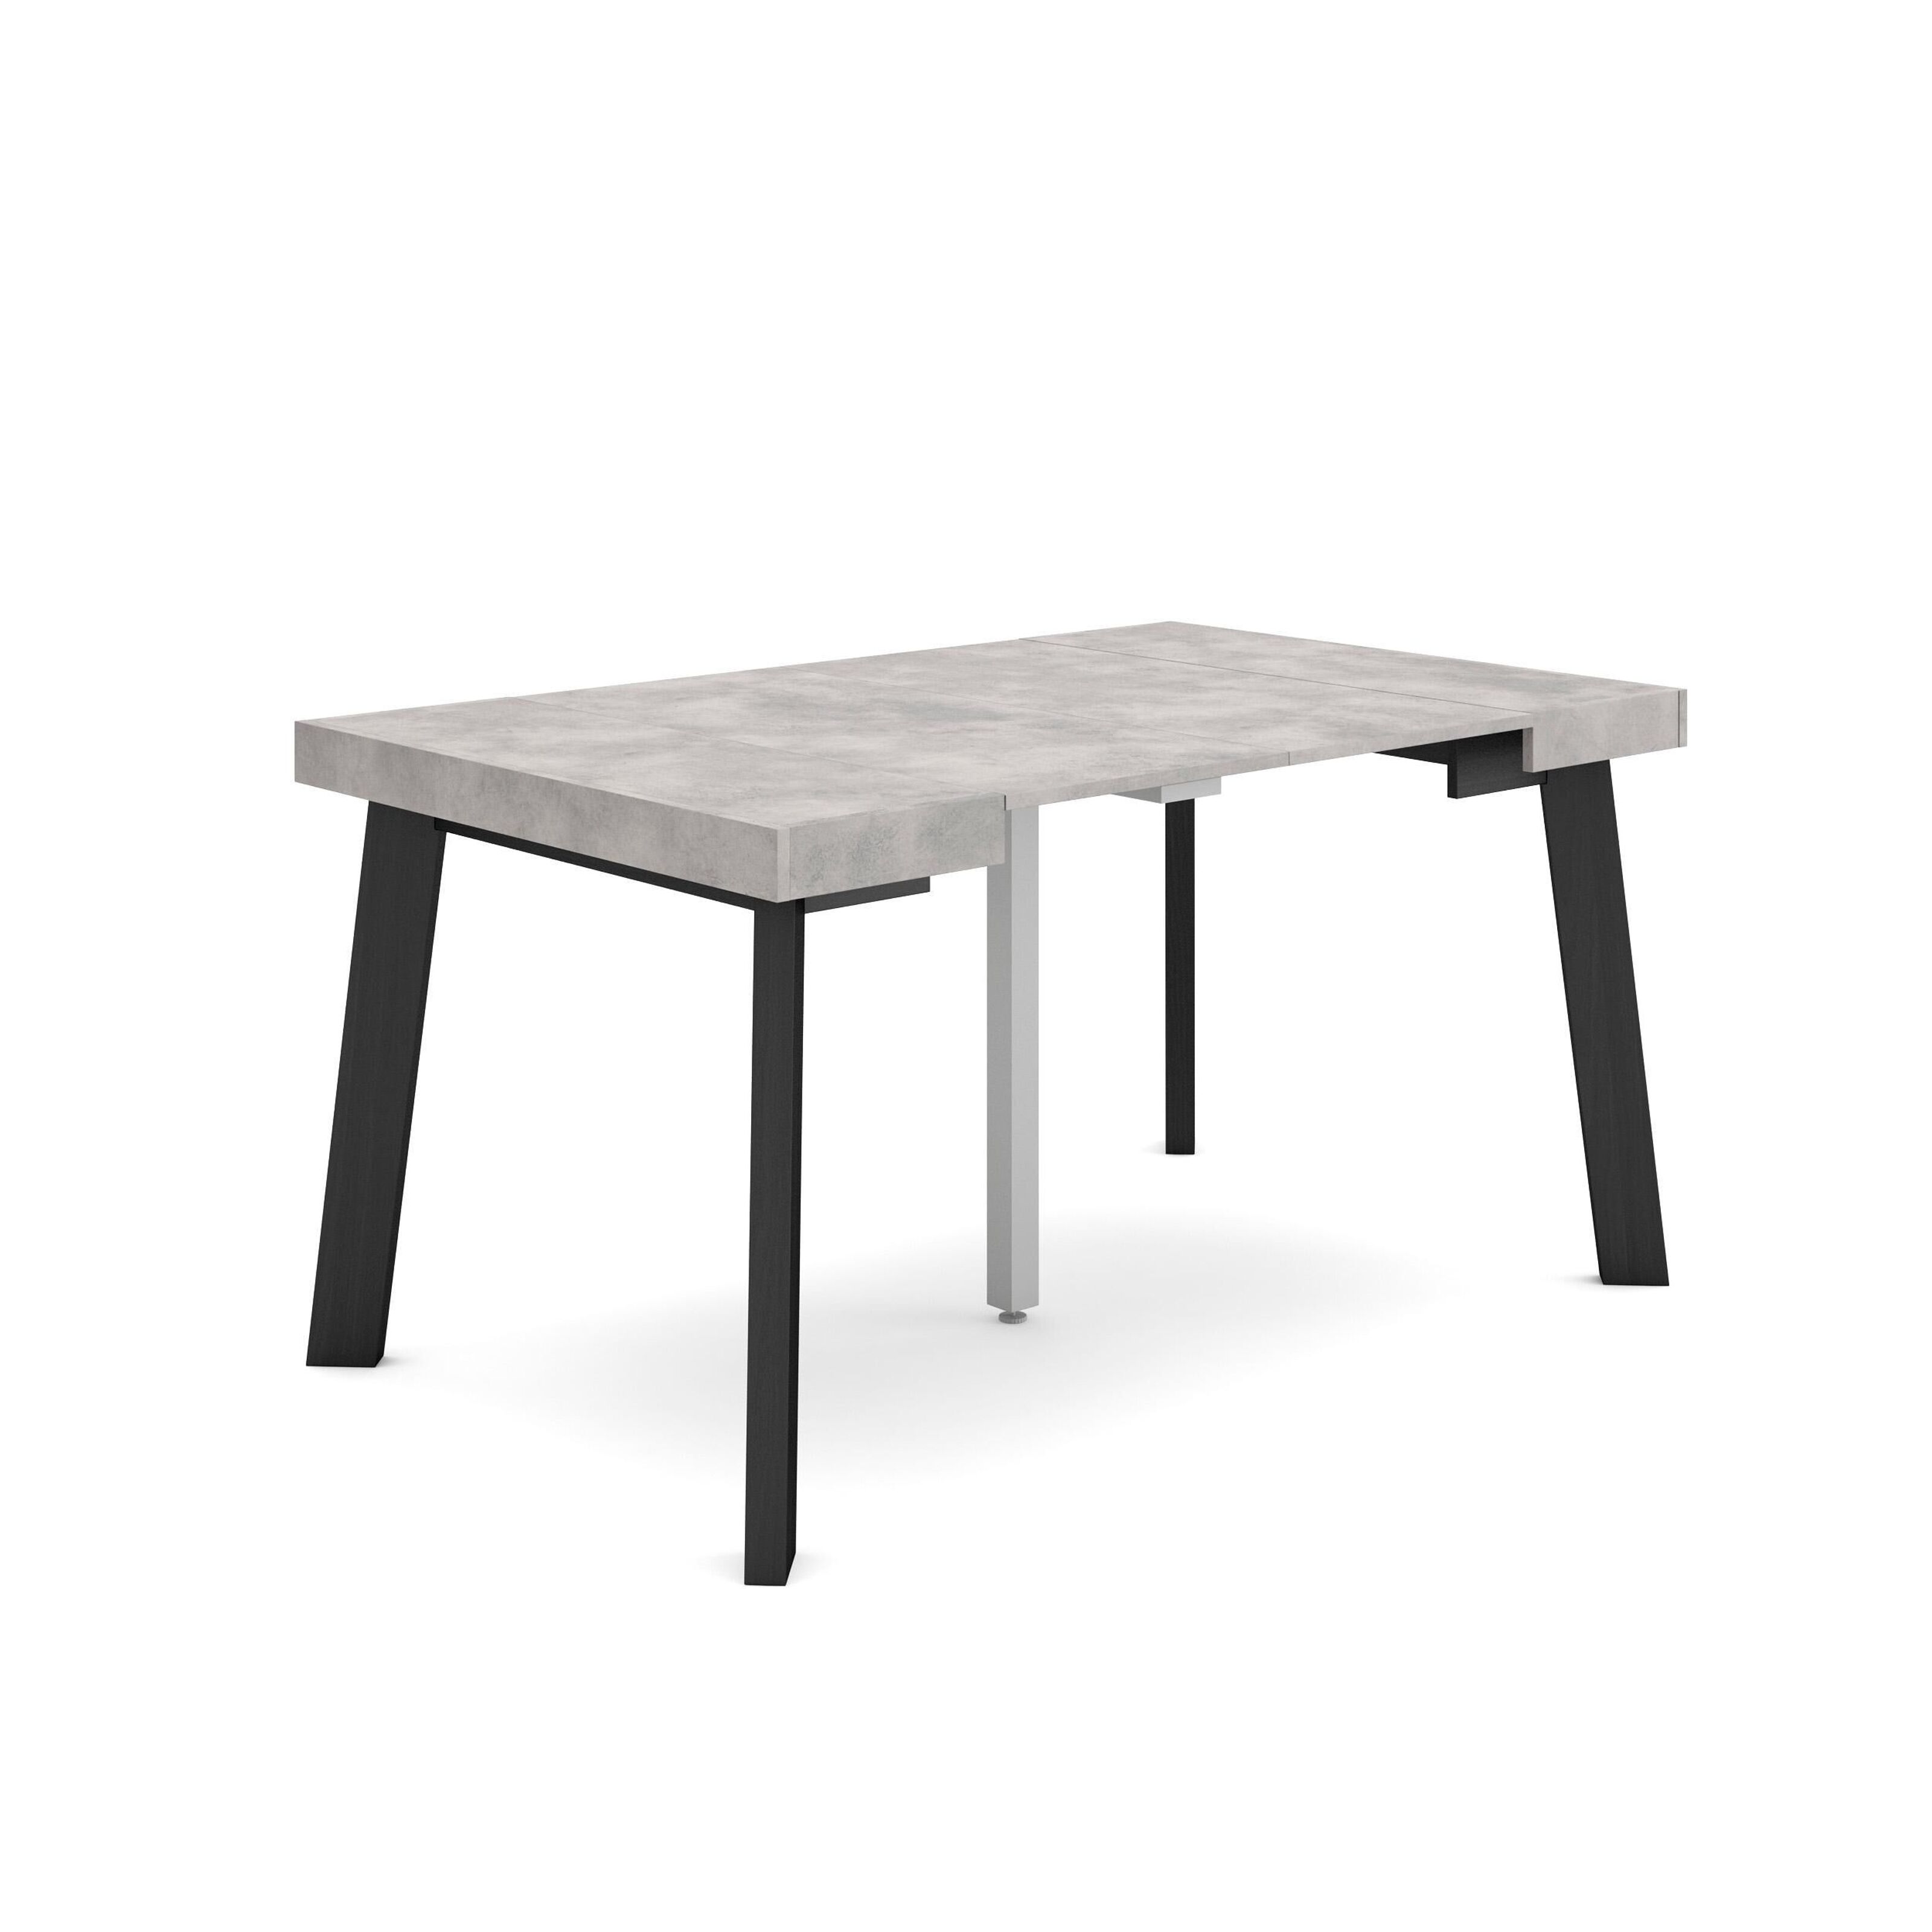 Skraut Home dining table in various finishes